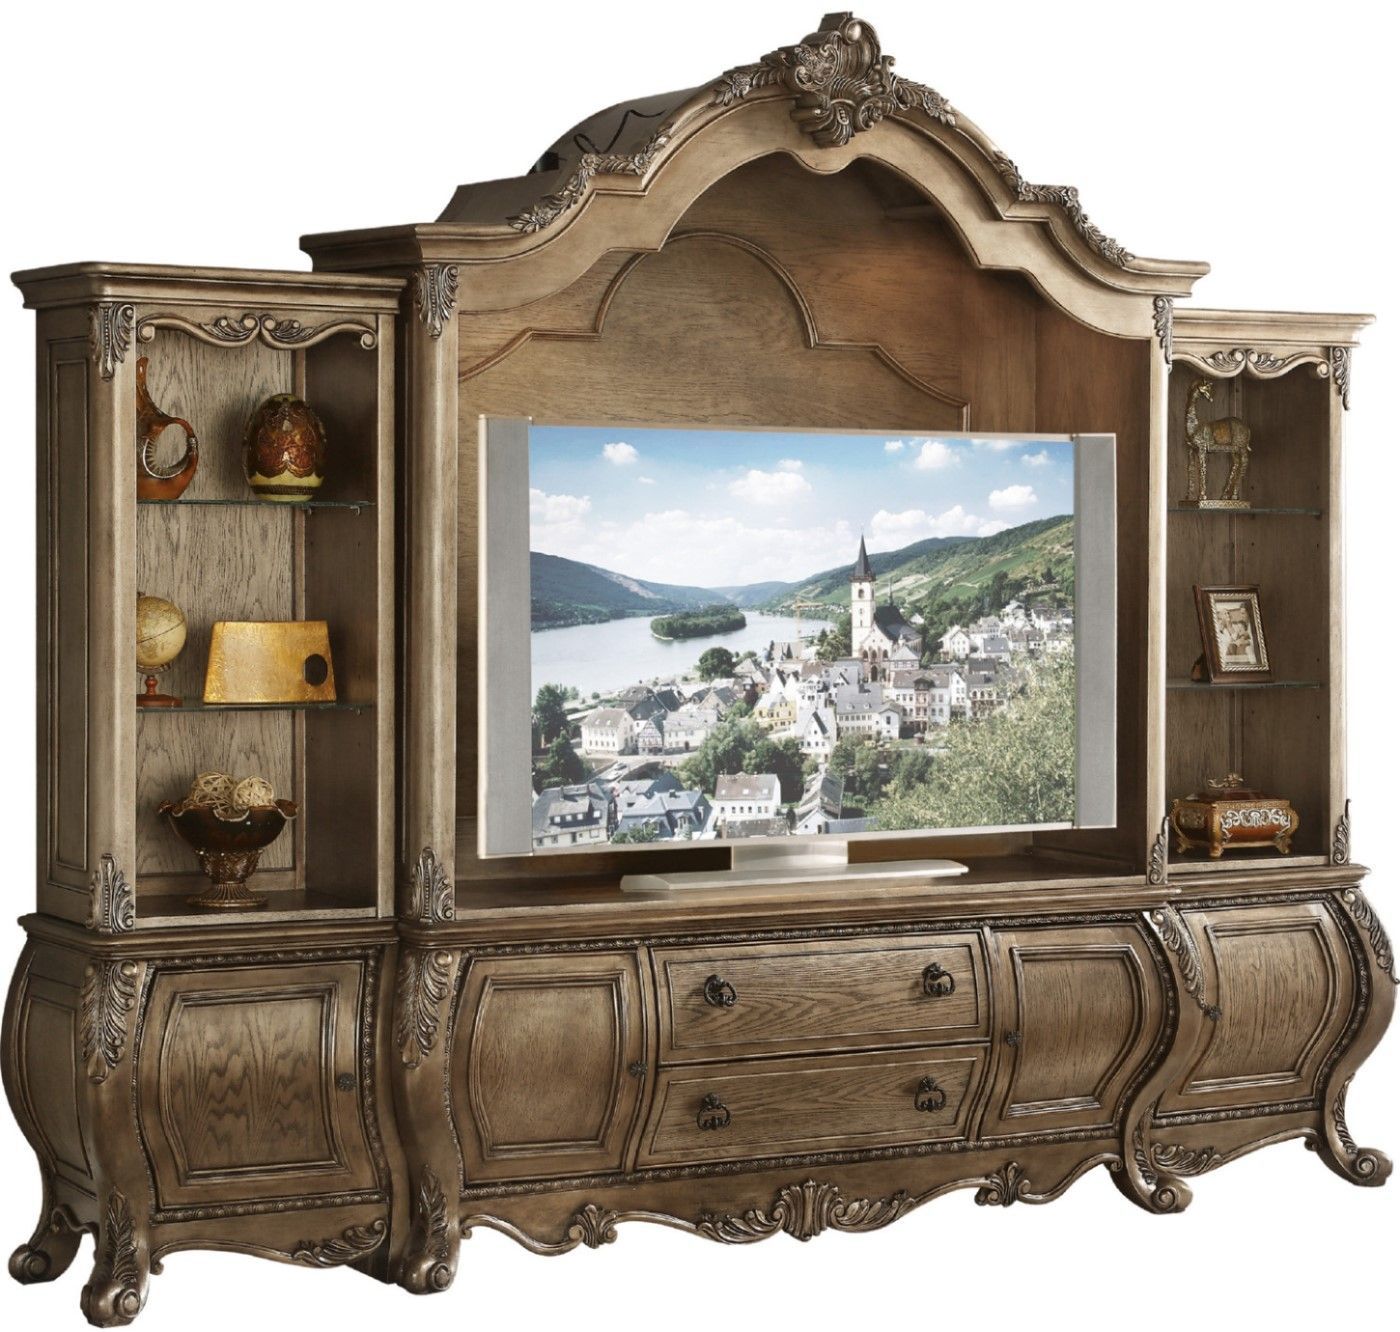 Carolongian Traditional Ornate Bombe Style Tv Console In With Regard To Antique Style Tv Stands (View 2 of 15)